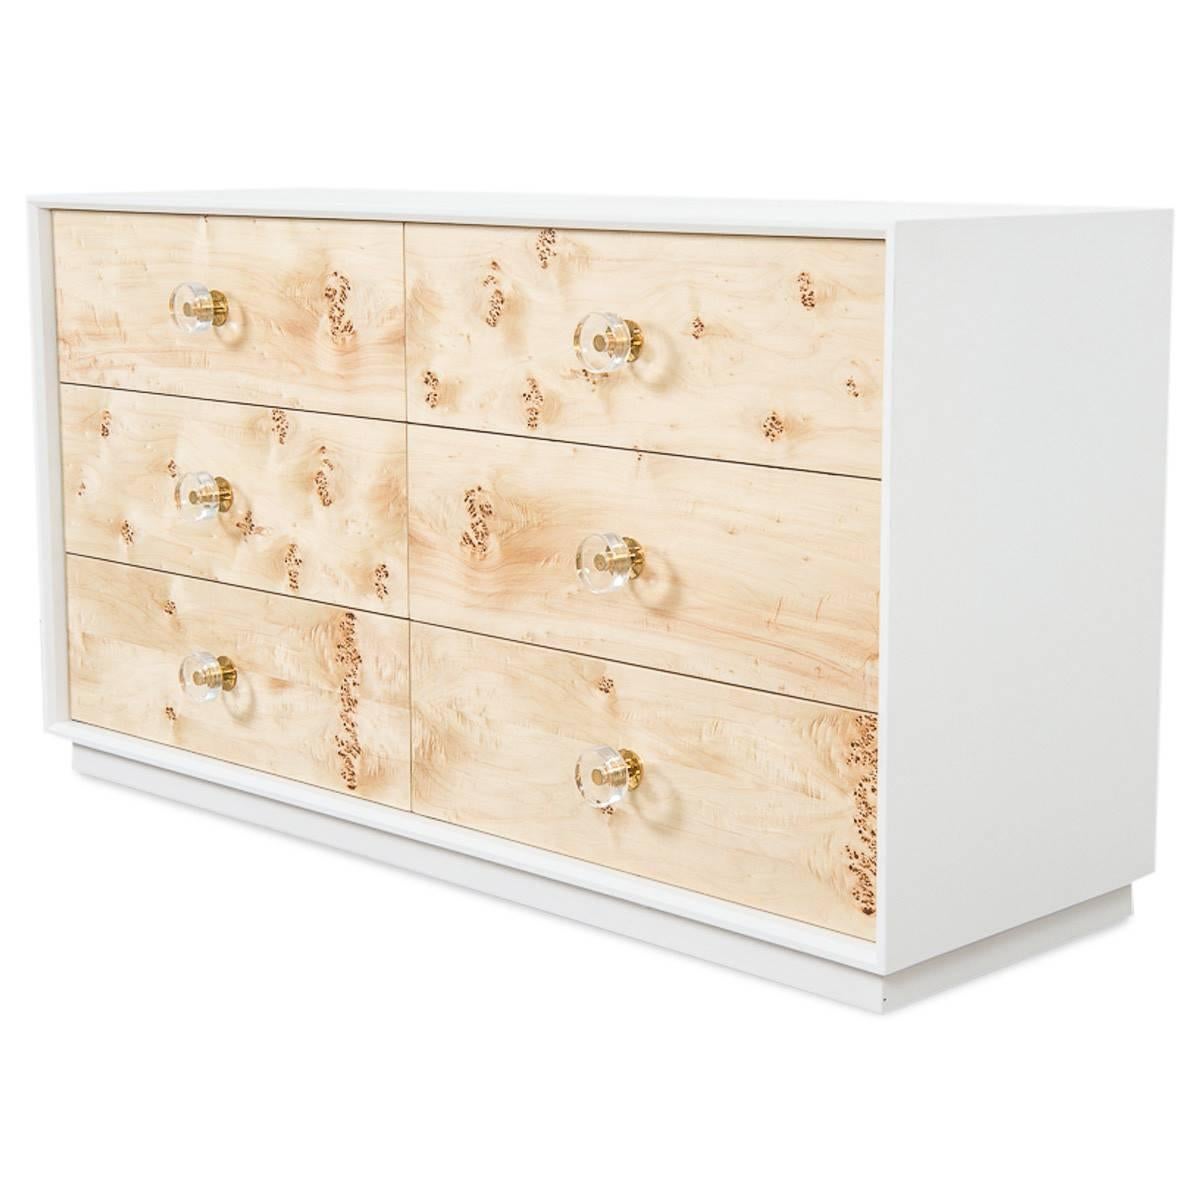 This dresser is finished in a burl wood veneer, showcasing the natural beauty of this type of wood. The six drawers have Lucite and brass pull handles, surrounded in matte white lacquer beveled edge case. 

Dimension:

60